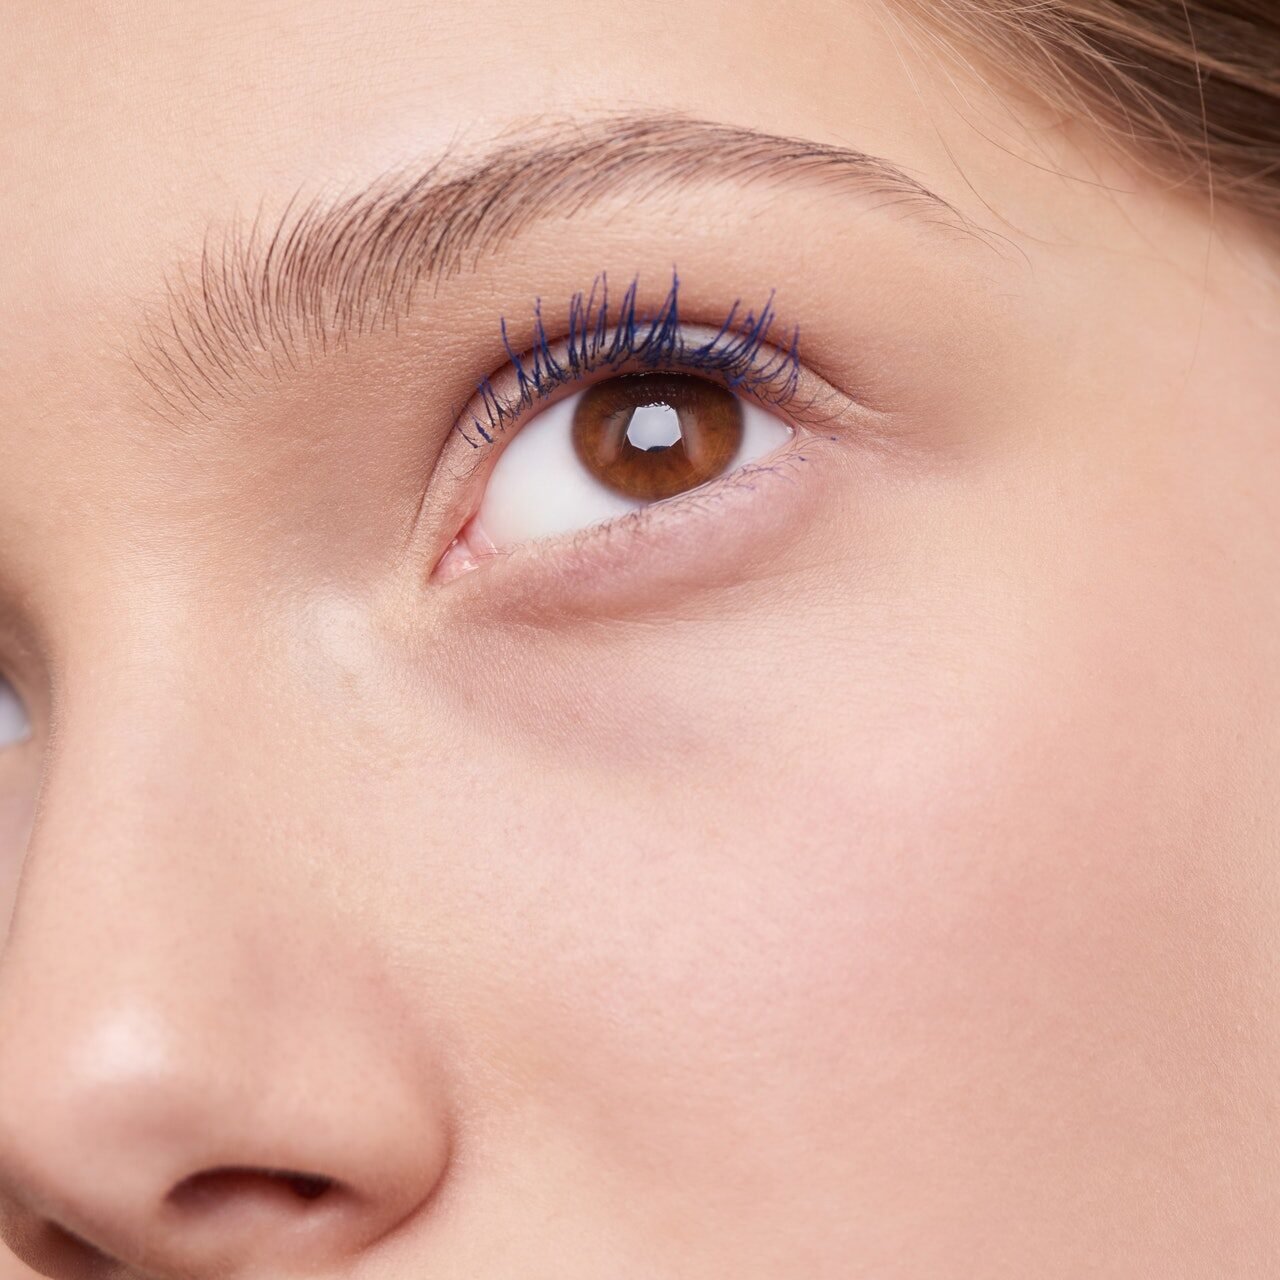 HOW TO FIX DROOPY EYELIDS? HERE ARE TREATMENT OPTIONS